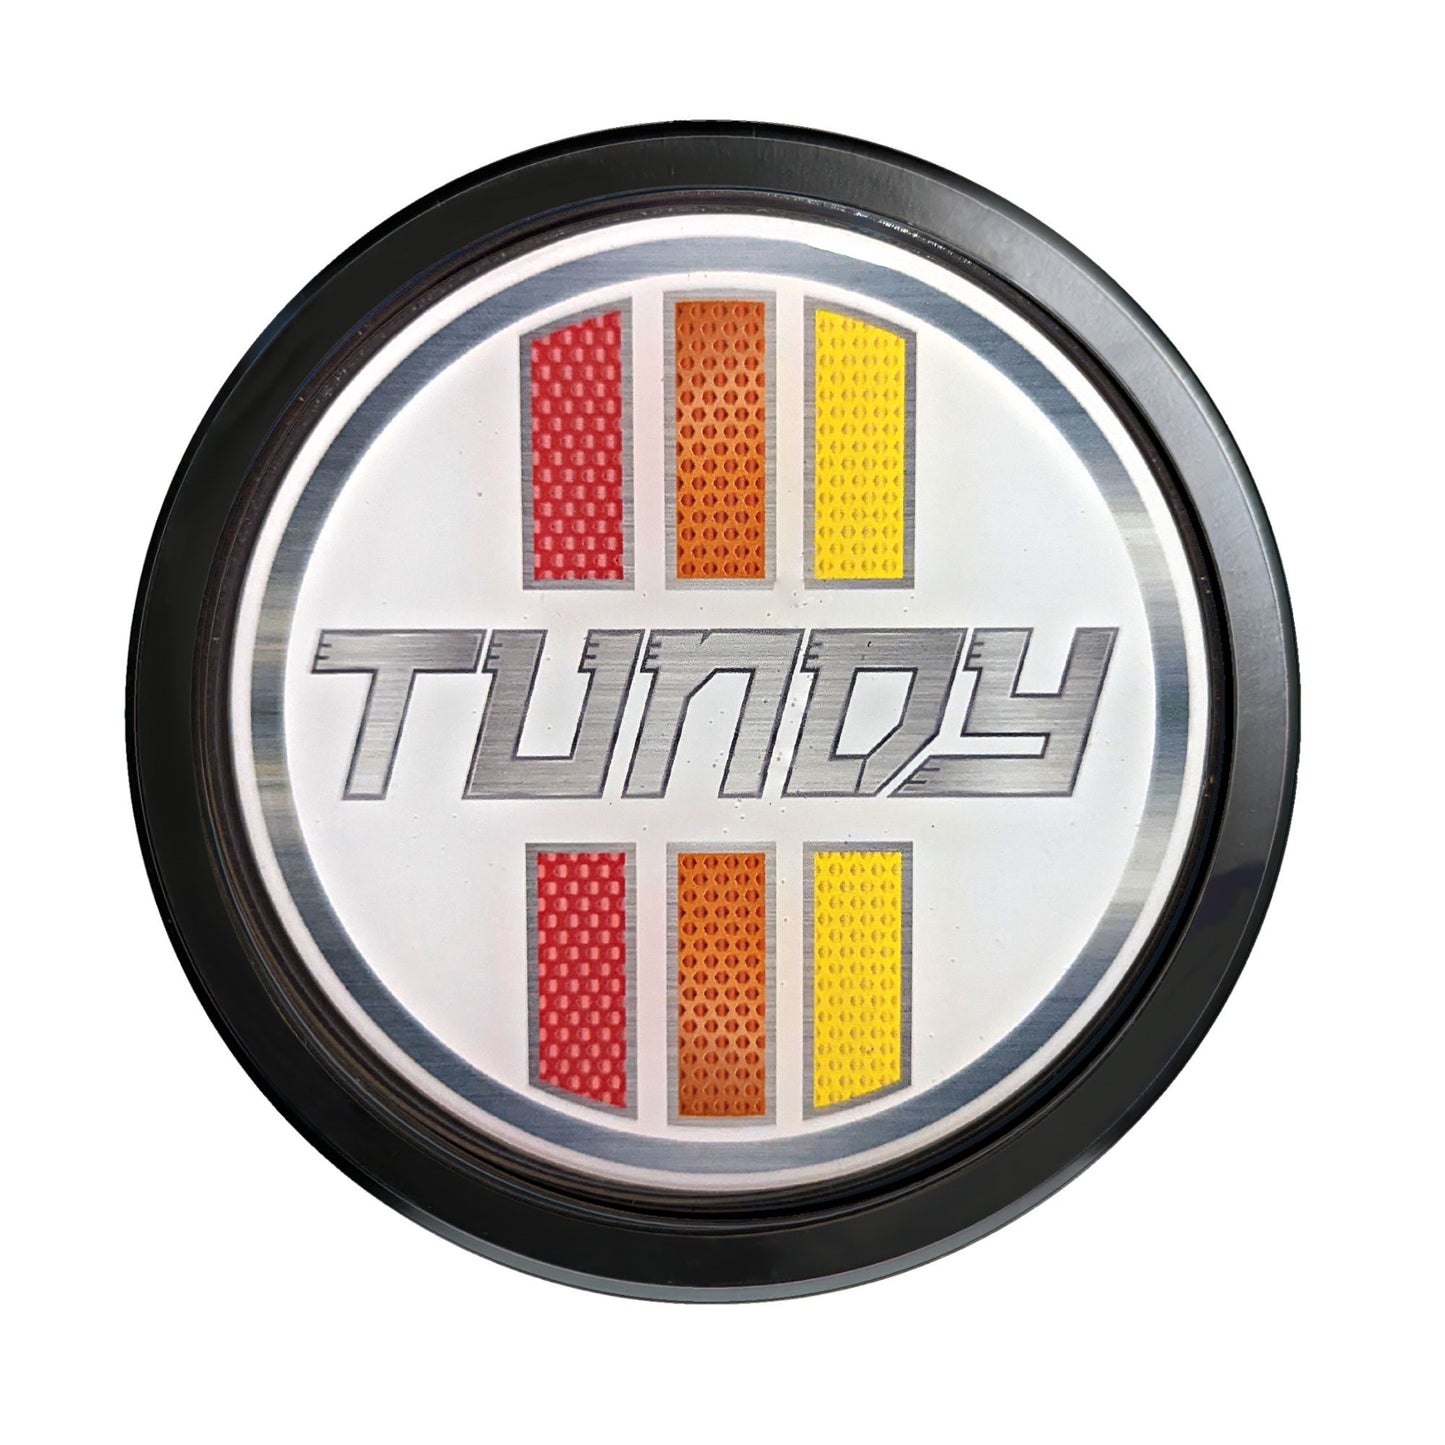 Standard Grille Badge Tundra Color Tri Color Fits Toyota Tundra Overlay Blackout, Tundra grille emblem badge, with warranty.